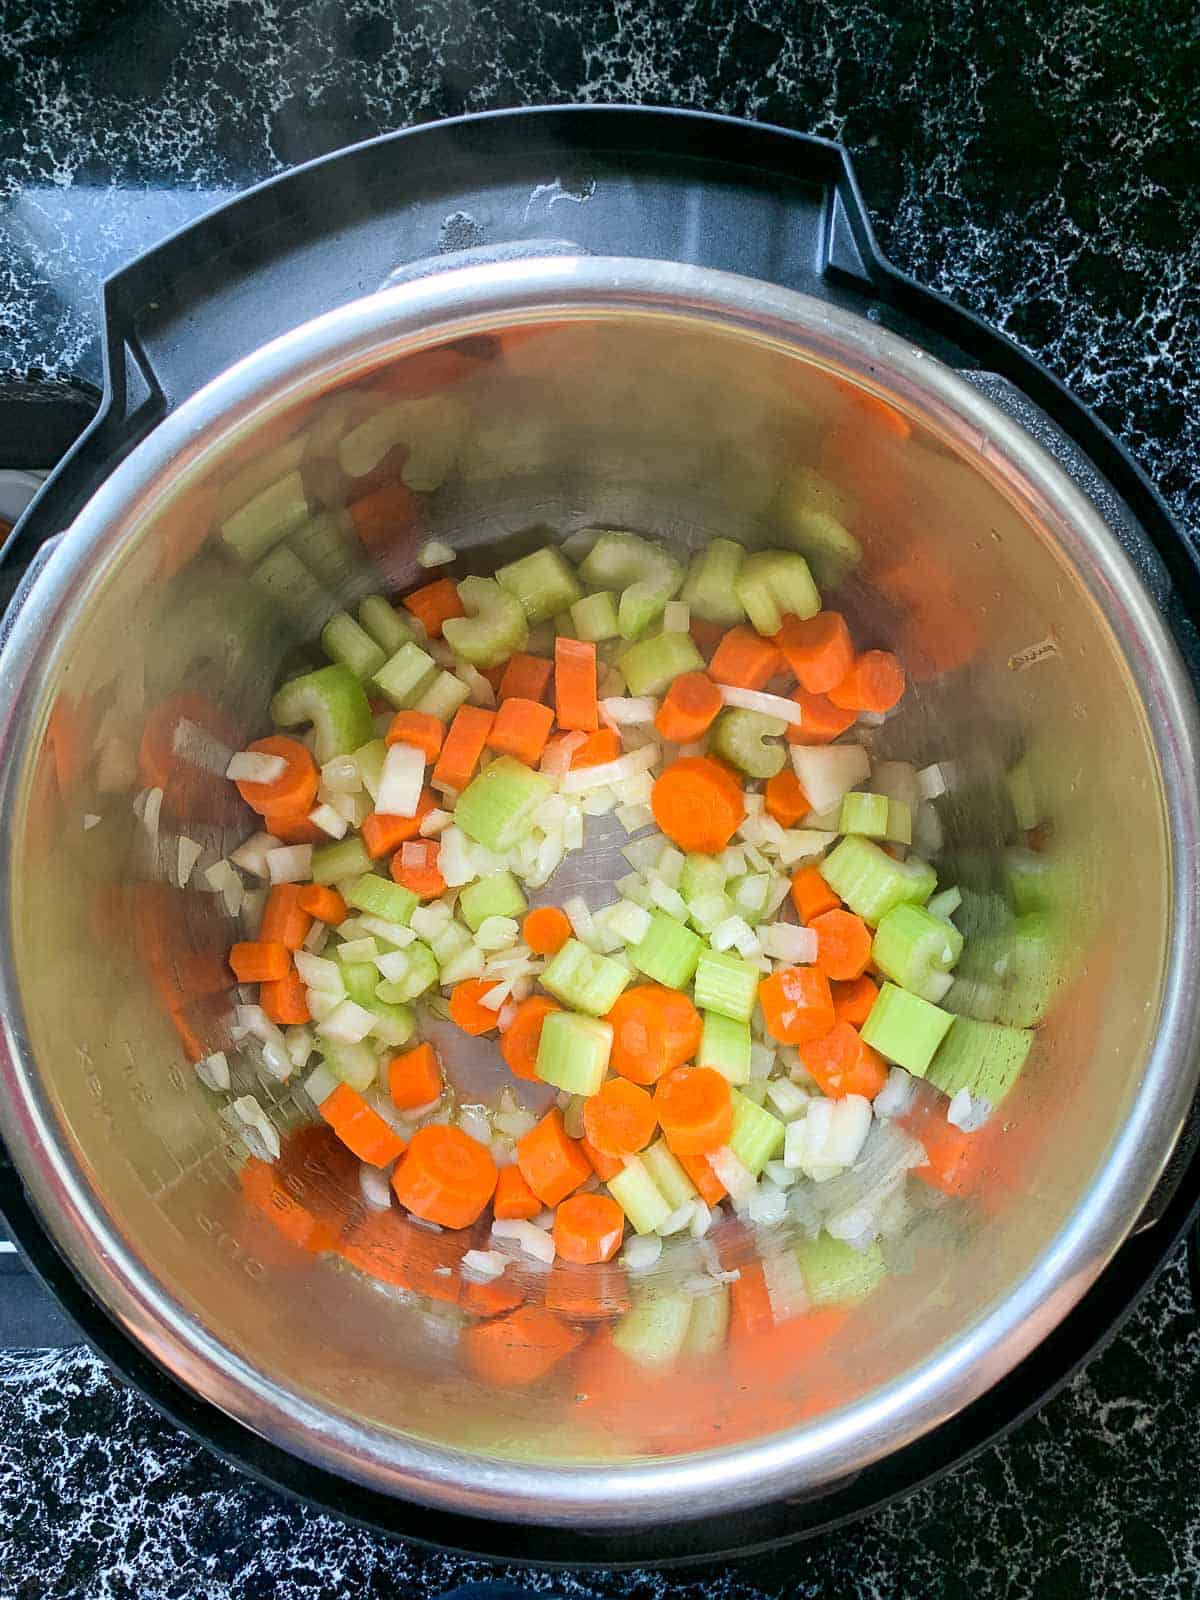 Preparing Minestrone Soup step 1, sautéed vegetables in an Instant pot.